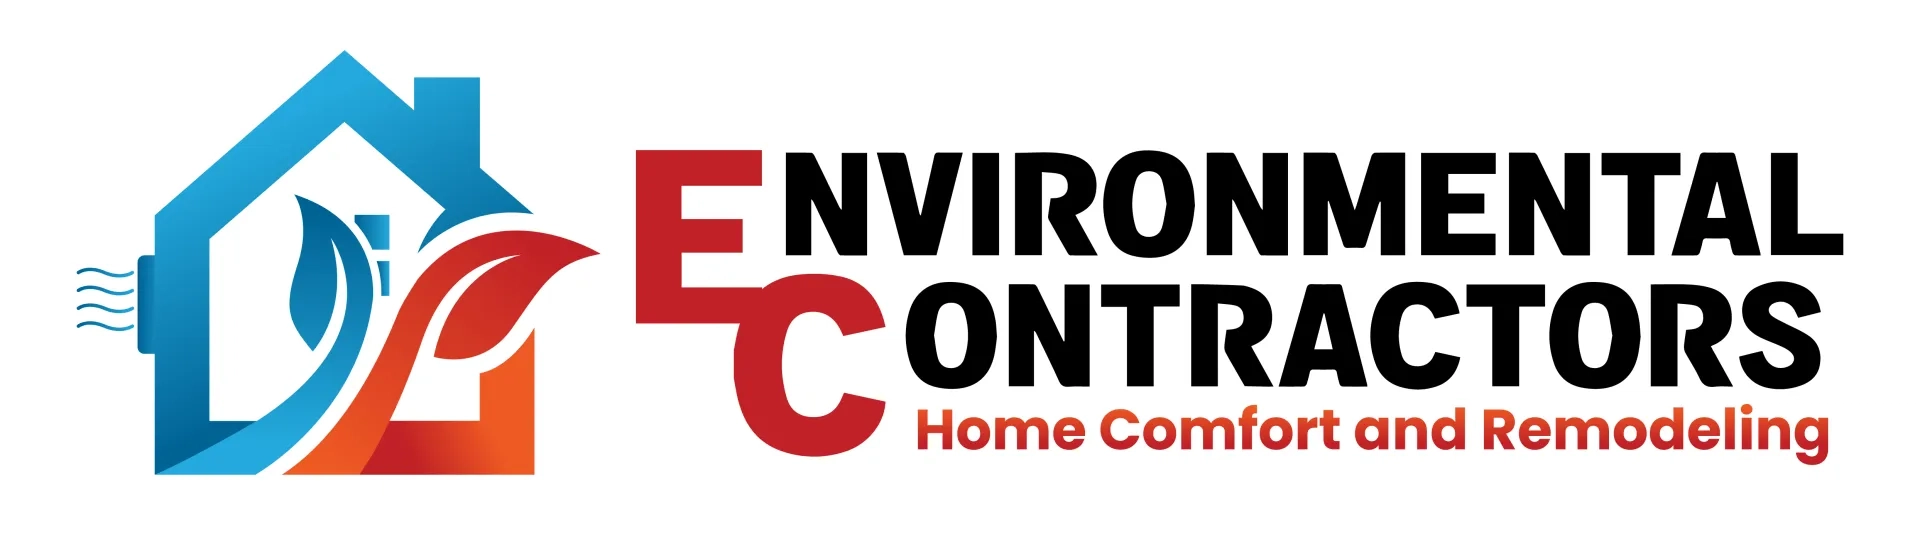 Environmental Contractors Home Comfort and Remodeling Logo